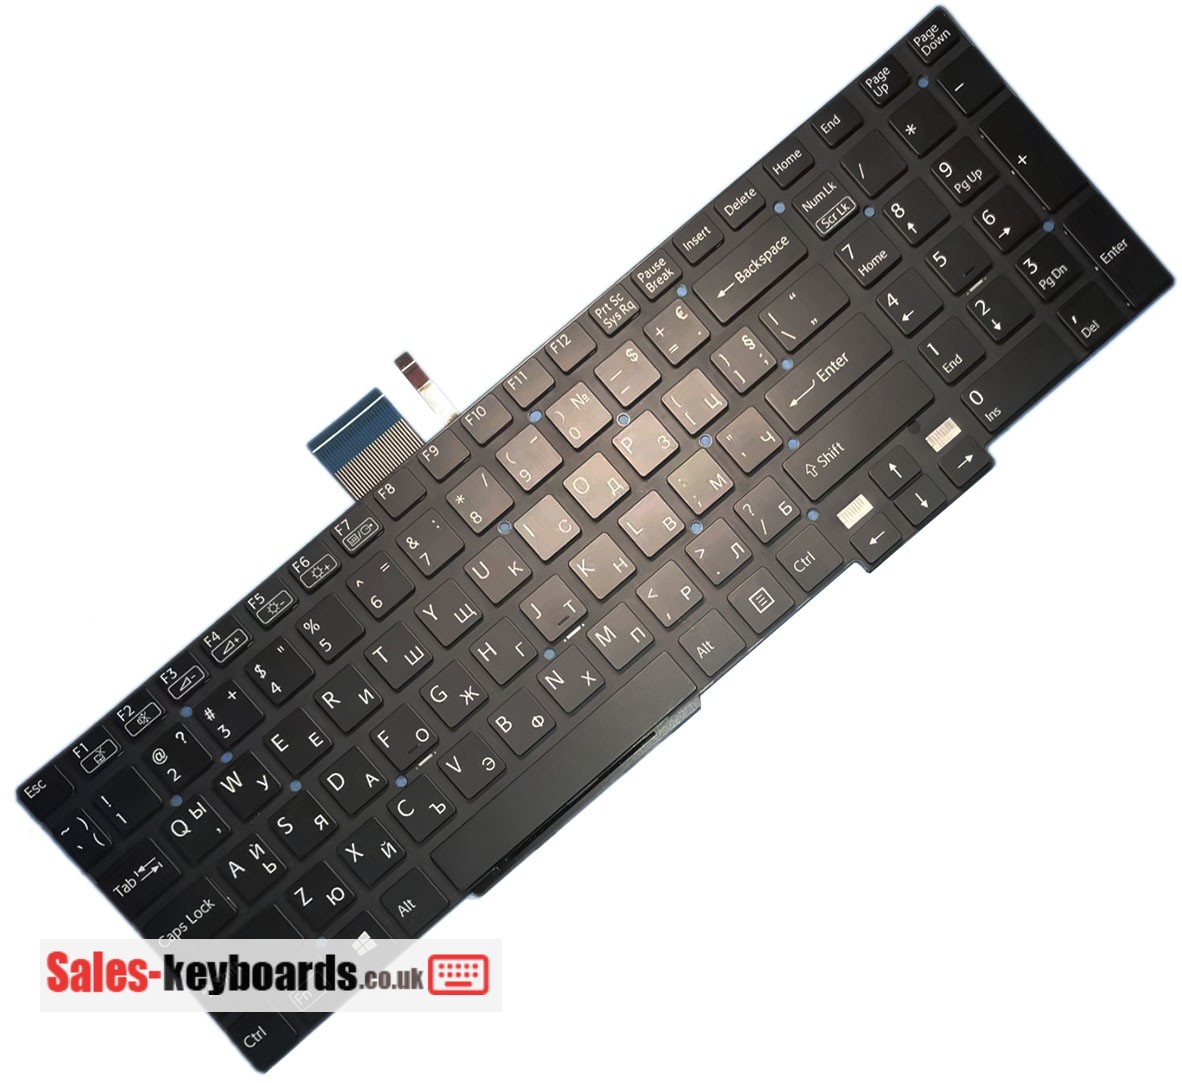 Sony VAIO SVT15115CL Keyboard replacement